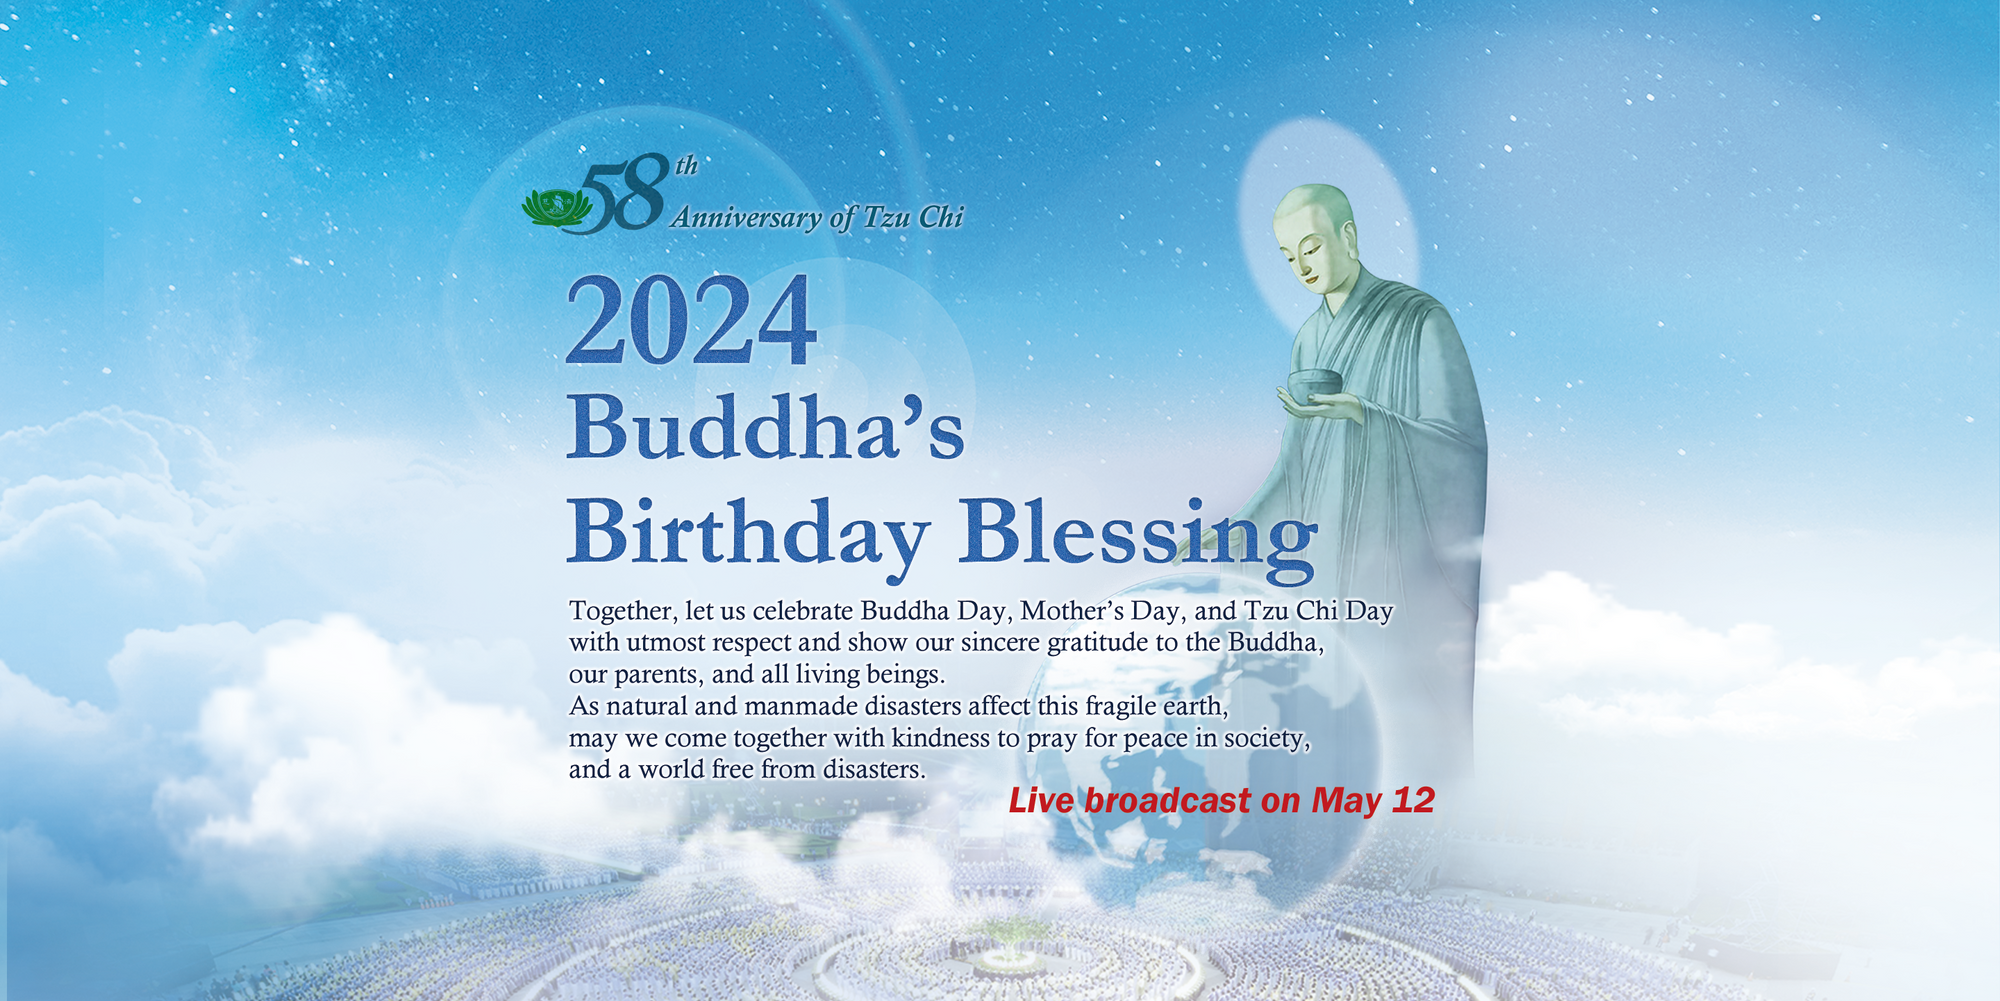 2024 Buddha’s Birthday Blessing—Unite and pray for peace and harmony